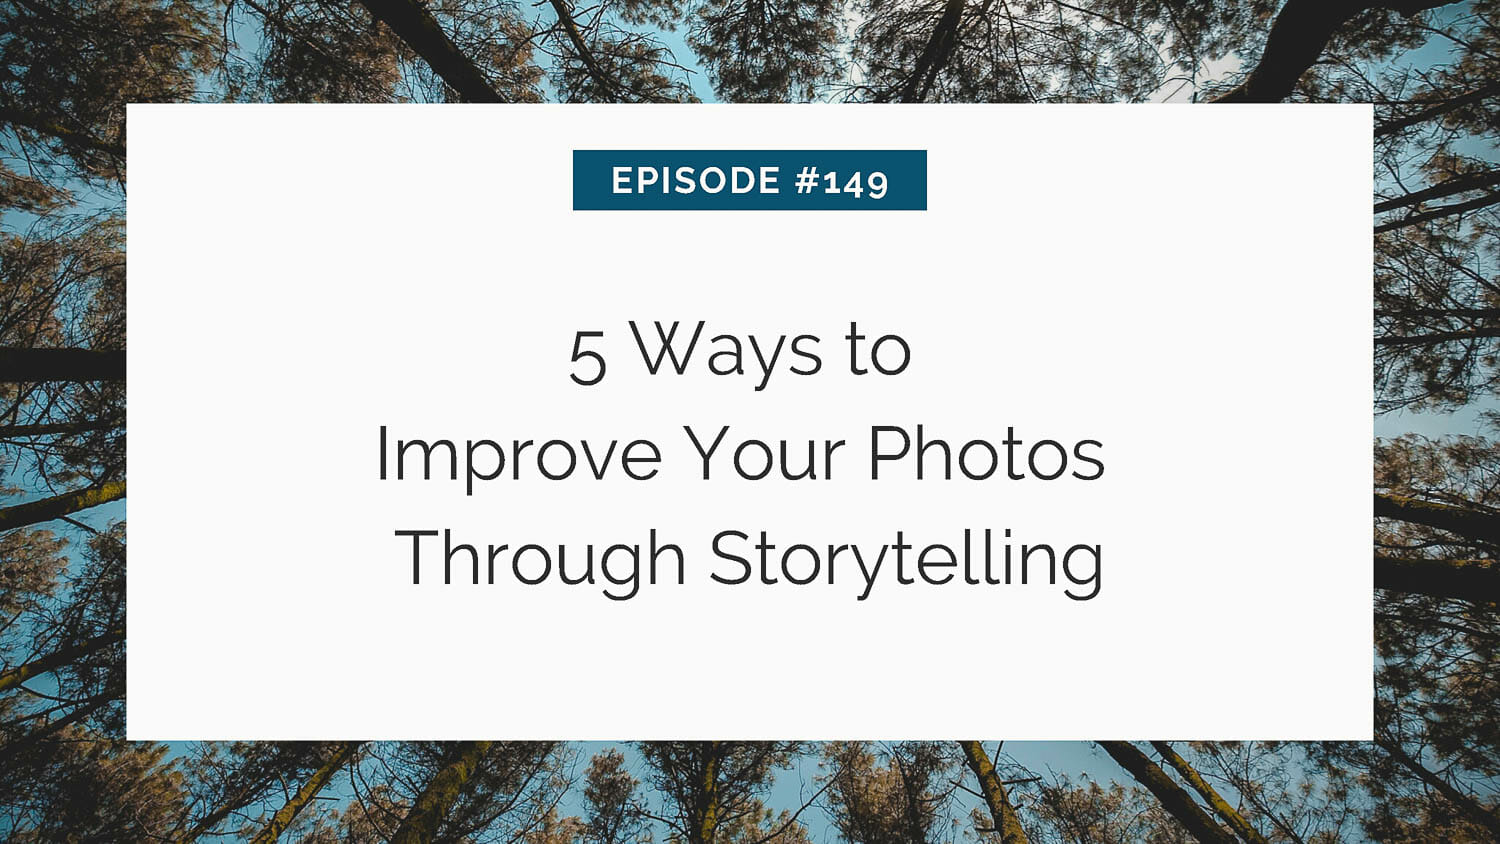 Title slide for a tutorial on enhancing photography with storytelling, "episode #149: 5 ways to improve your photos through storytelling," against a backdrop of treetops and sky.